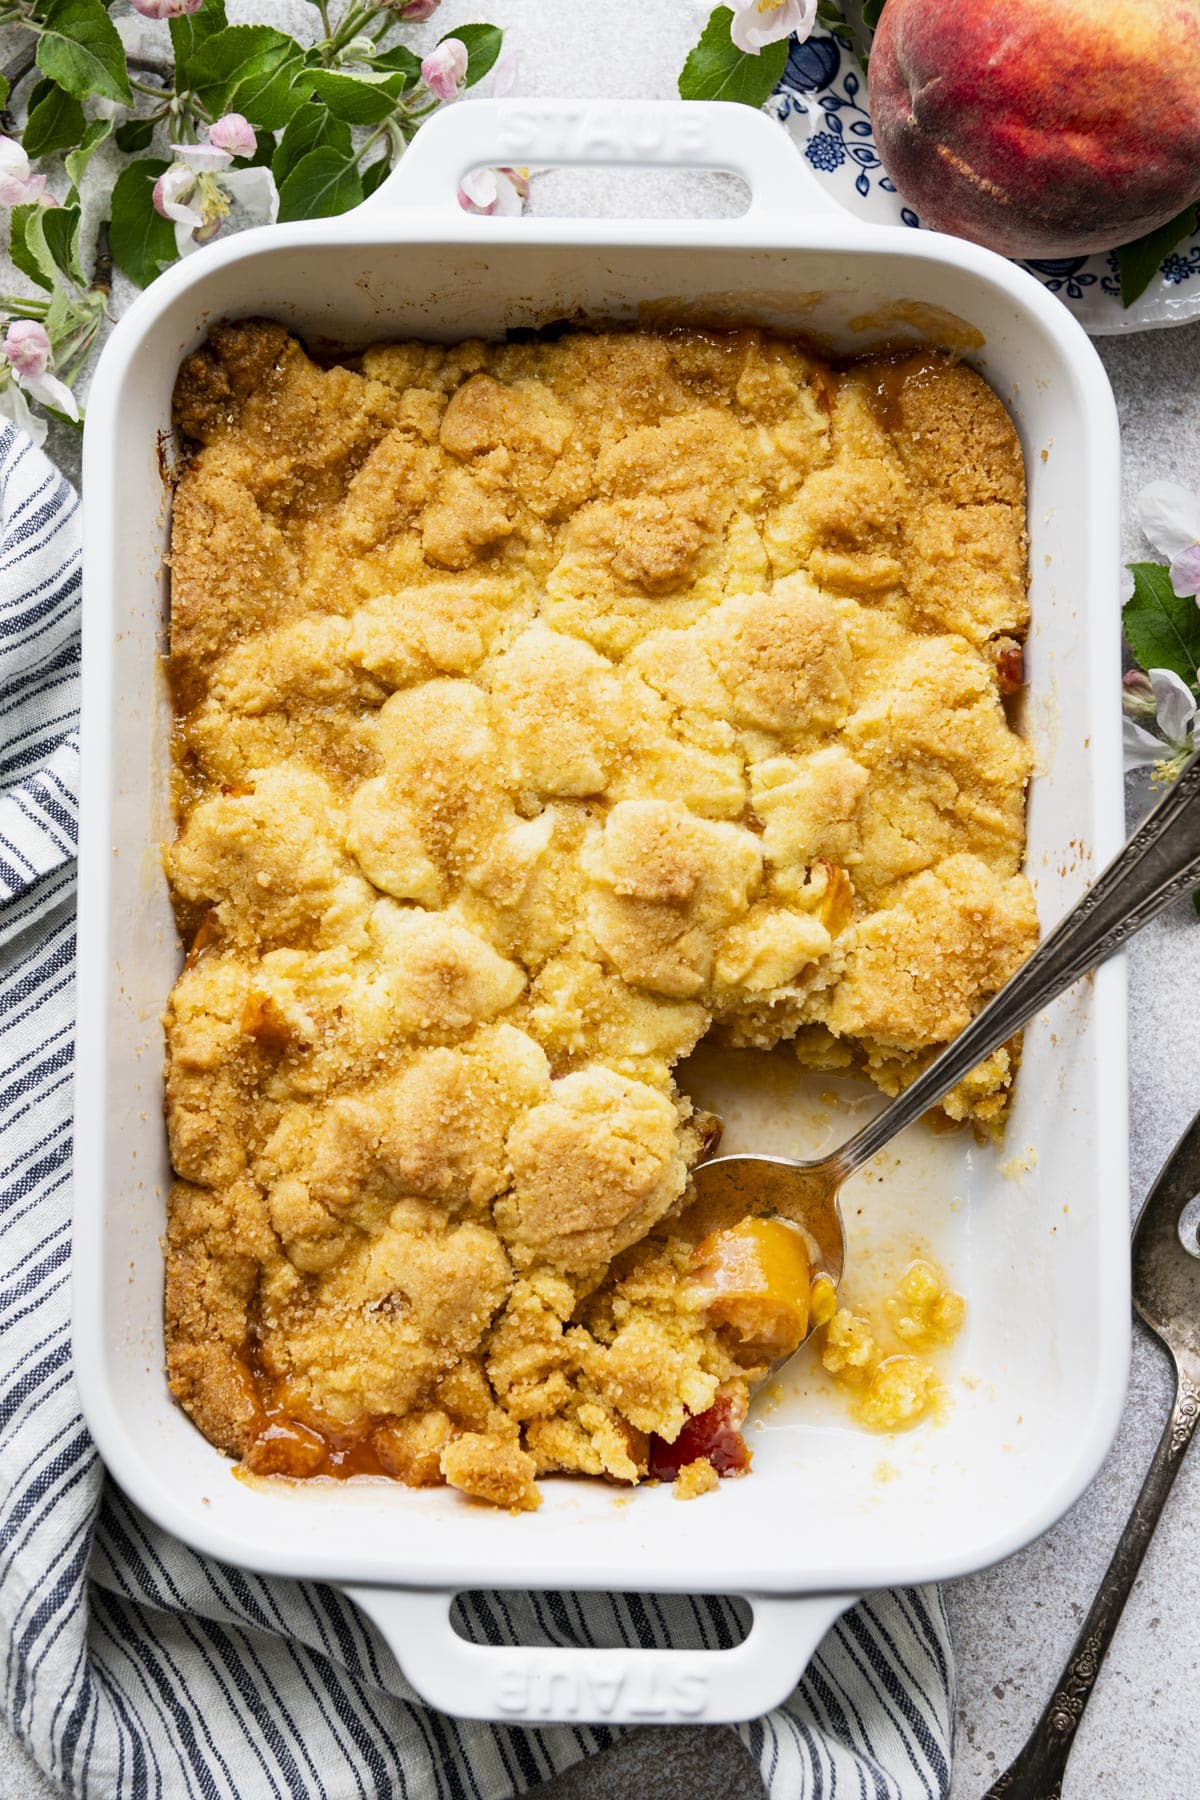 Easy peach cobbler with jiffy mix in a white baking dish.